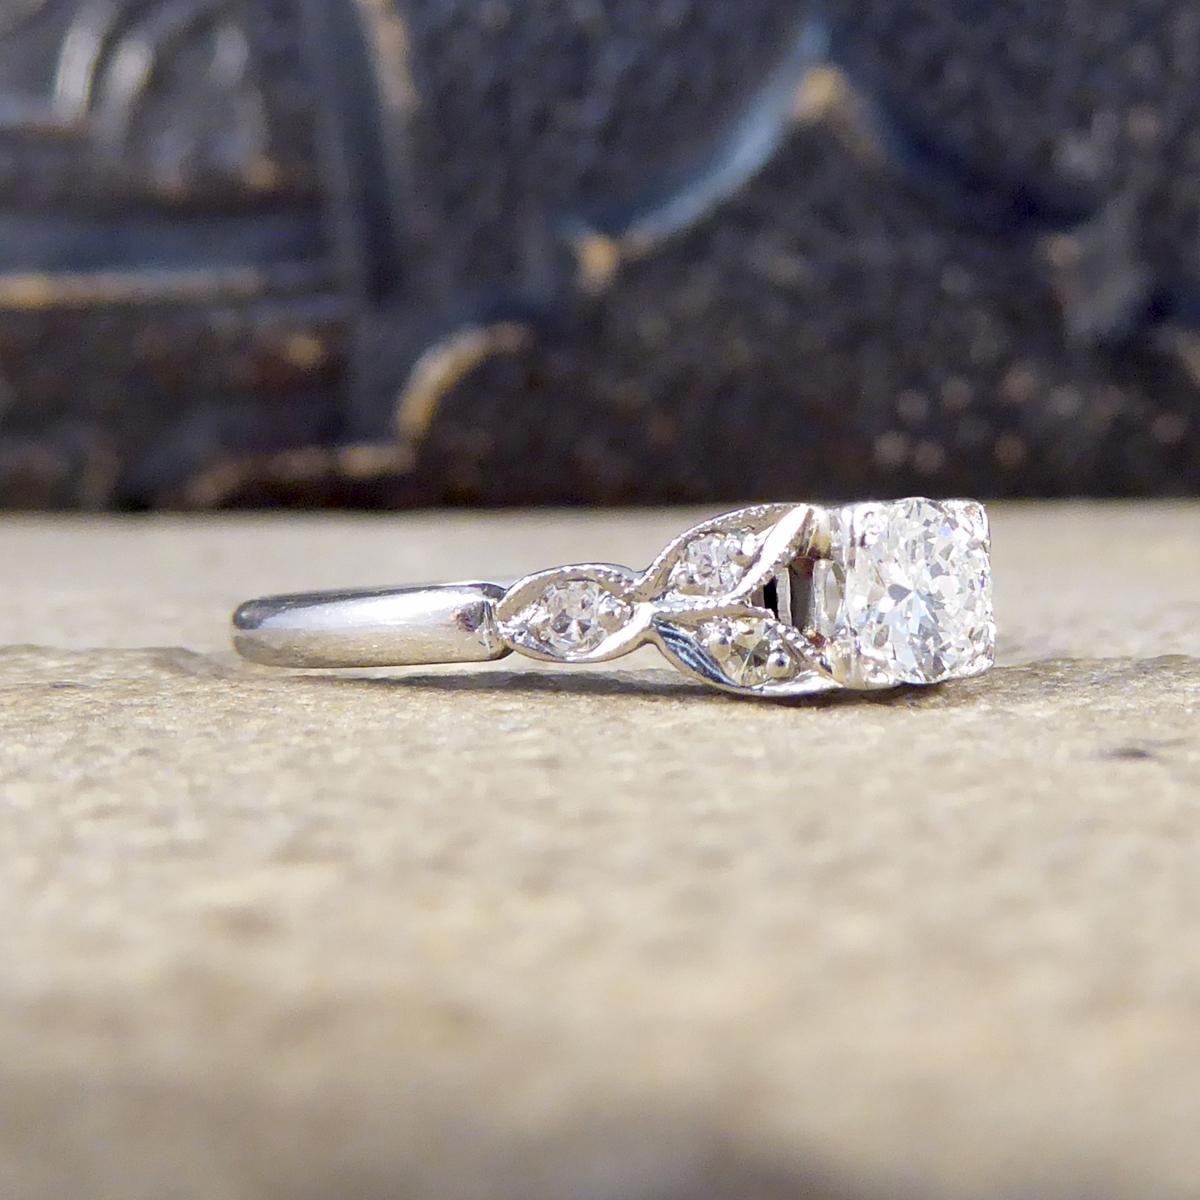 This ring was hand crafted in the Edwardian era and modelled form platinum. In the centre sits a 0.25ct Round Cut Diamond with leaf shaped shoulders with three small Diamonds on each shoulder making a total of 0.31ct. A classic Edwardian ring that